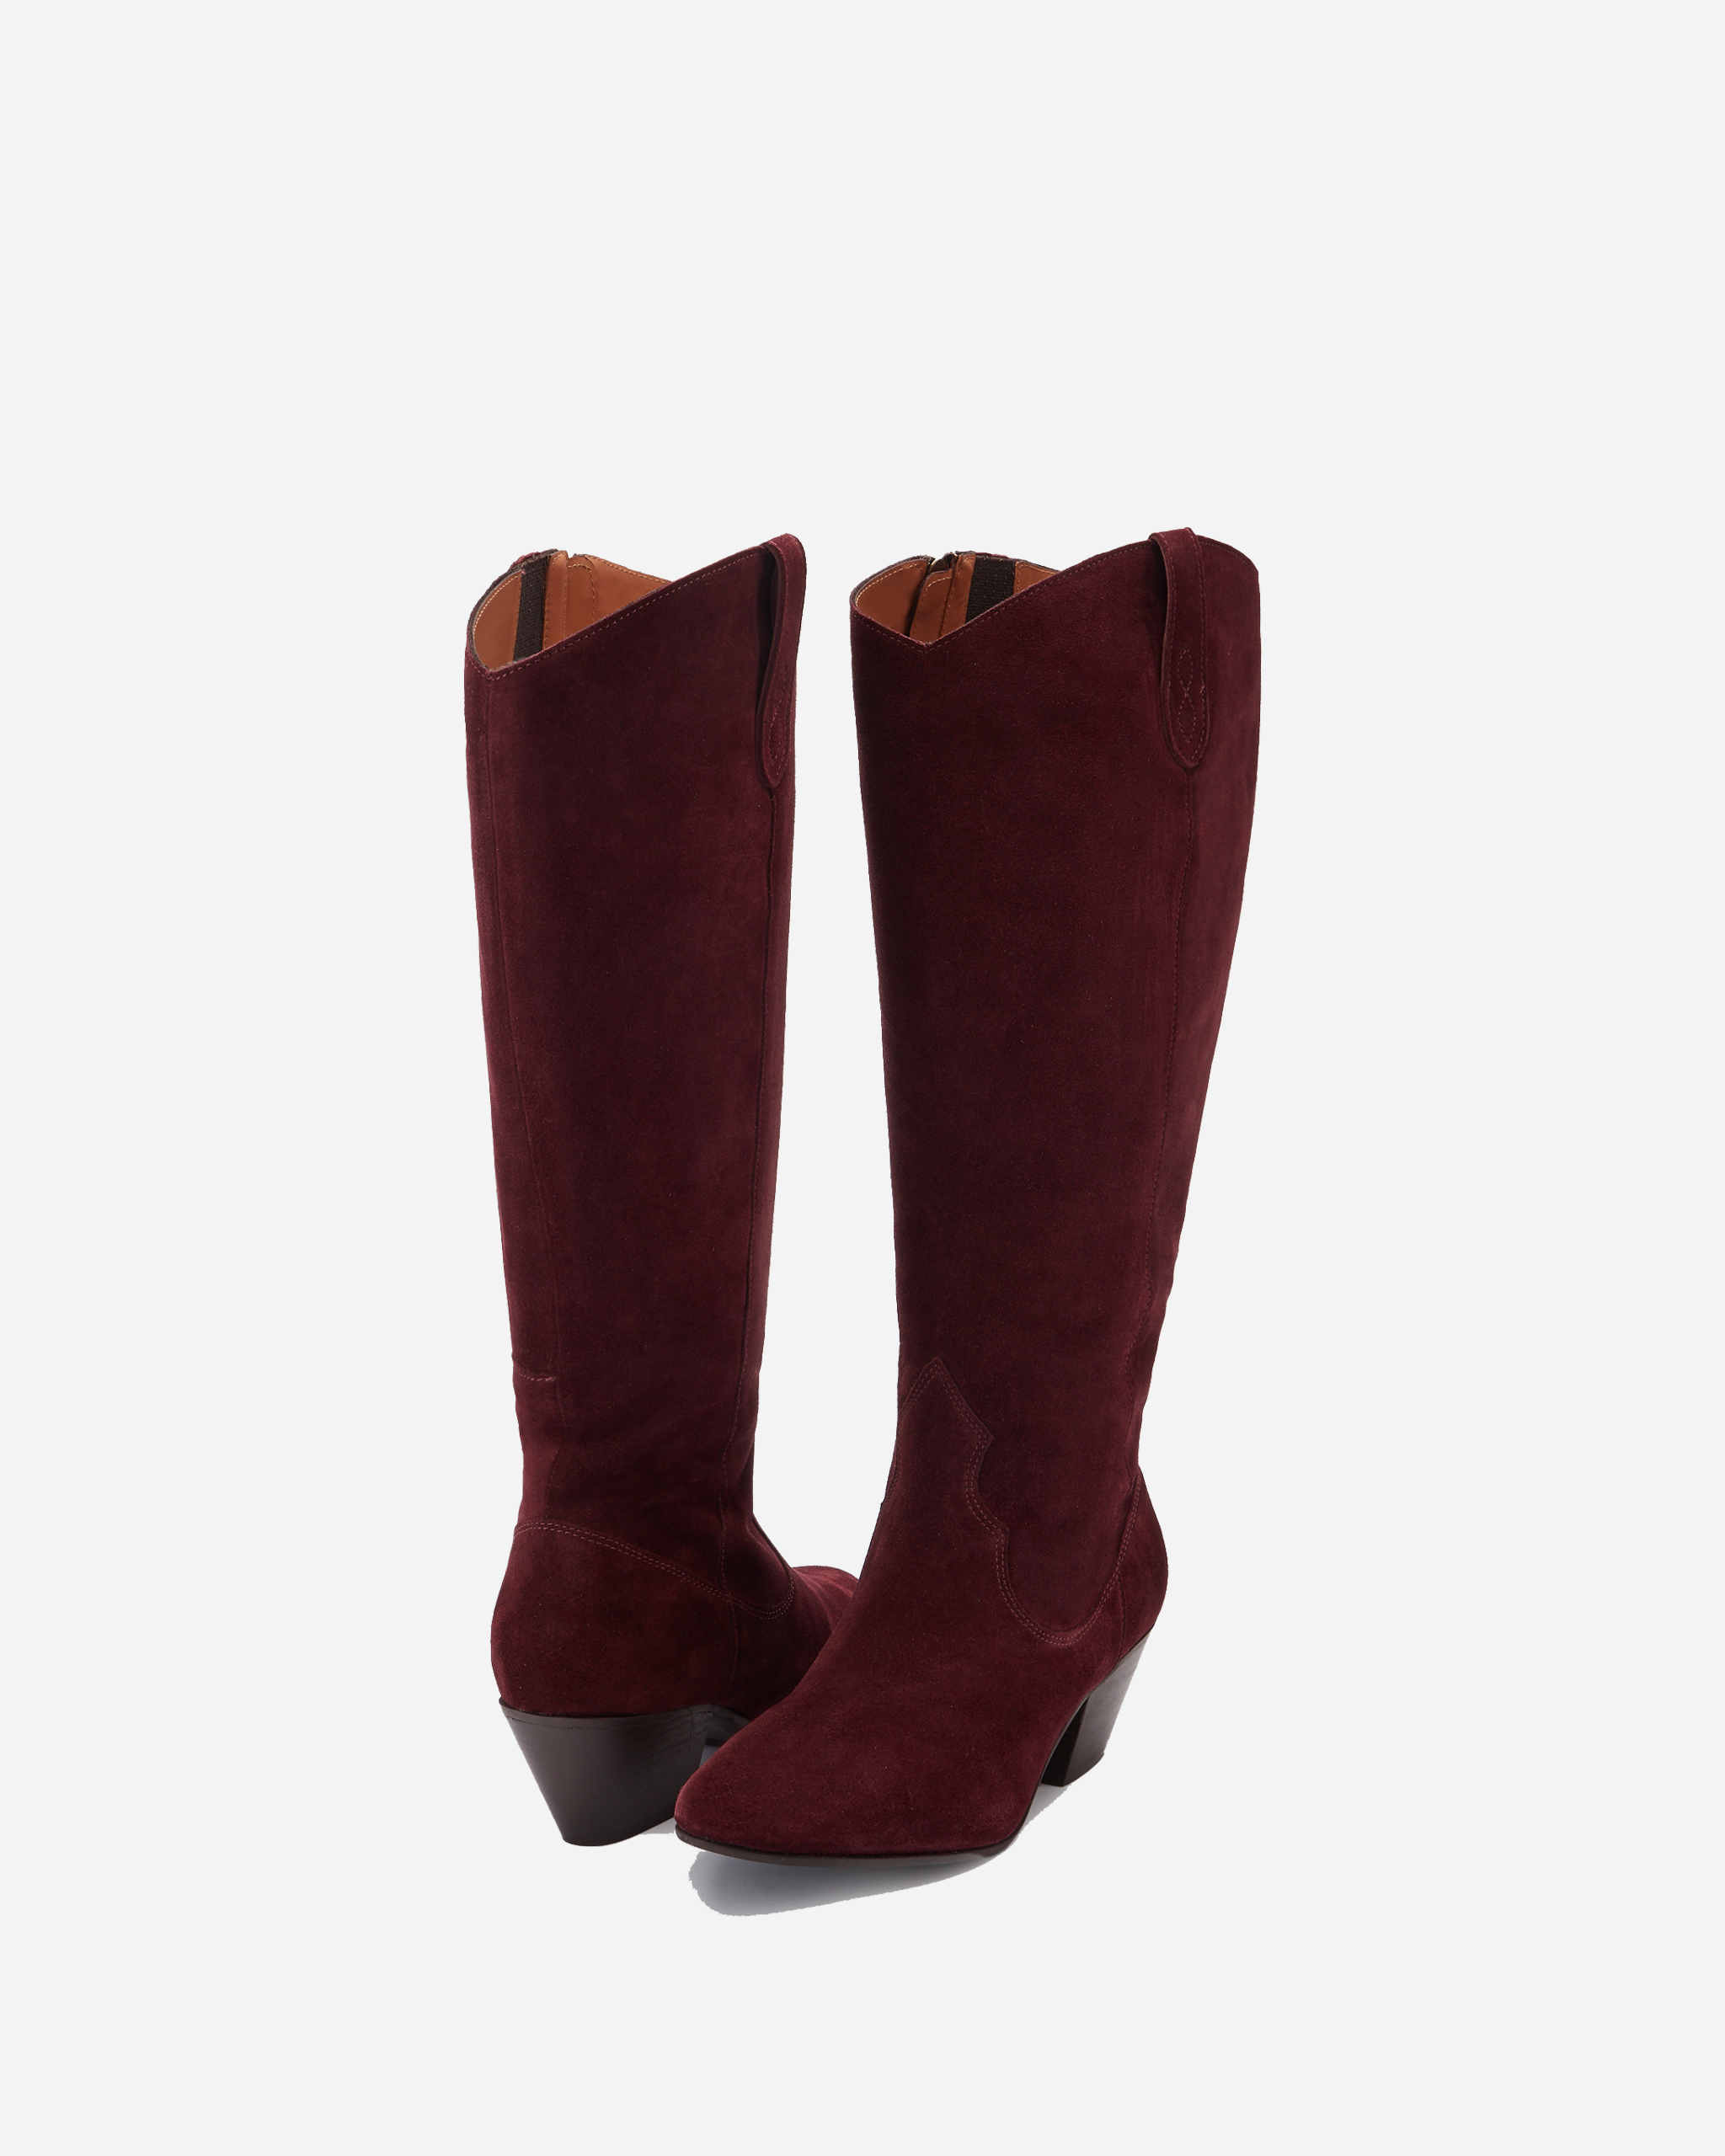 burgundy suede western style boots